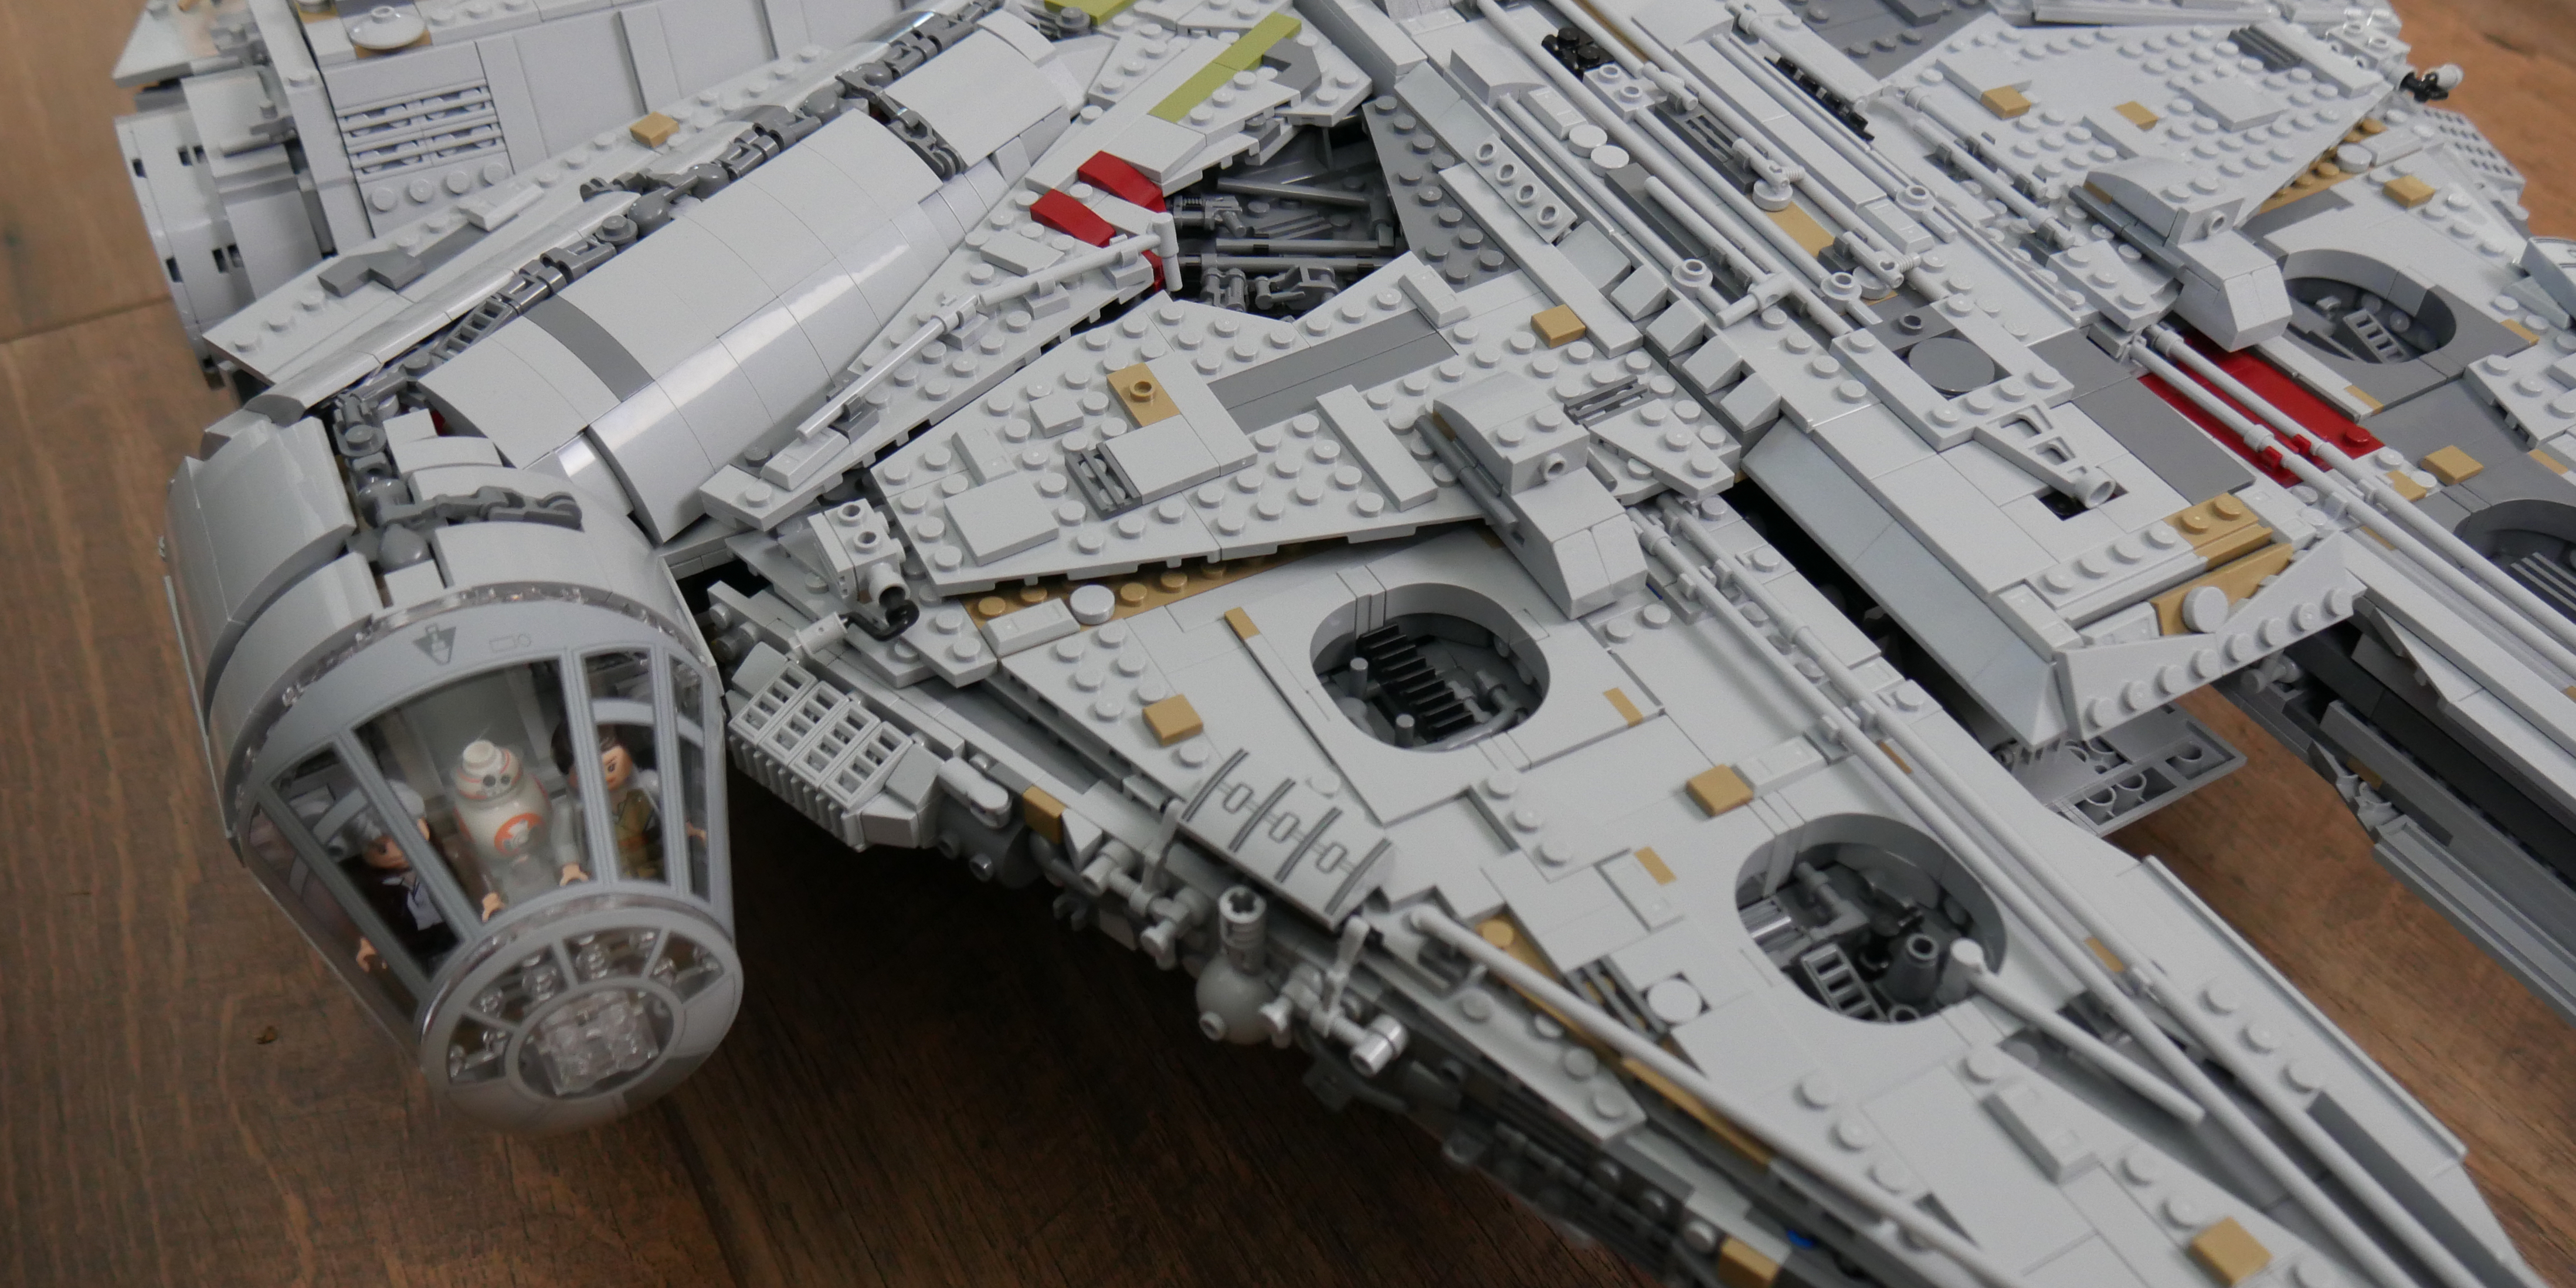 UCS Millennium hands-on look - 9to5Toys